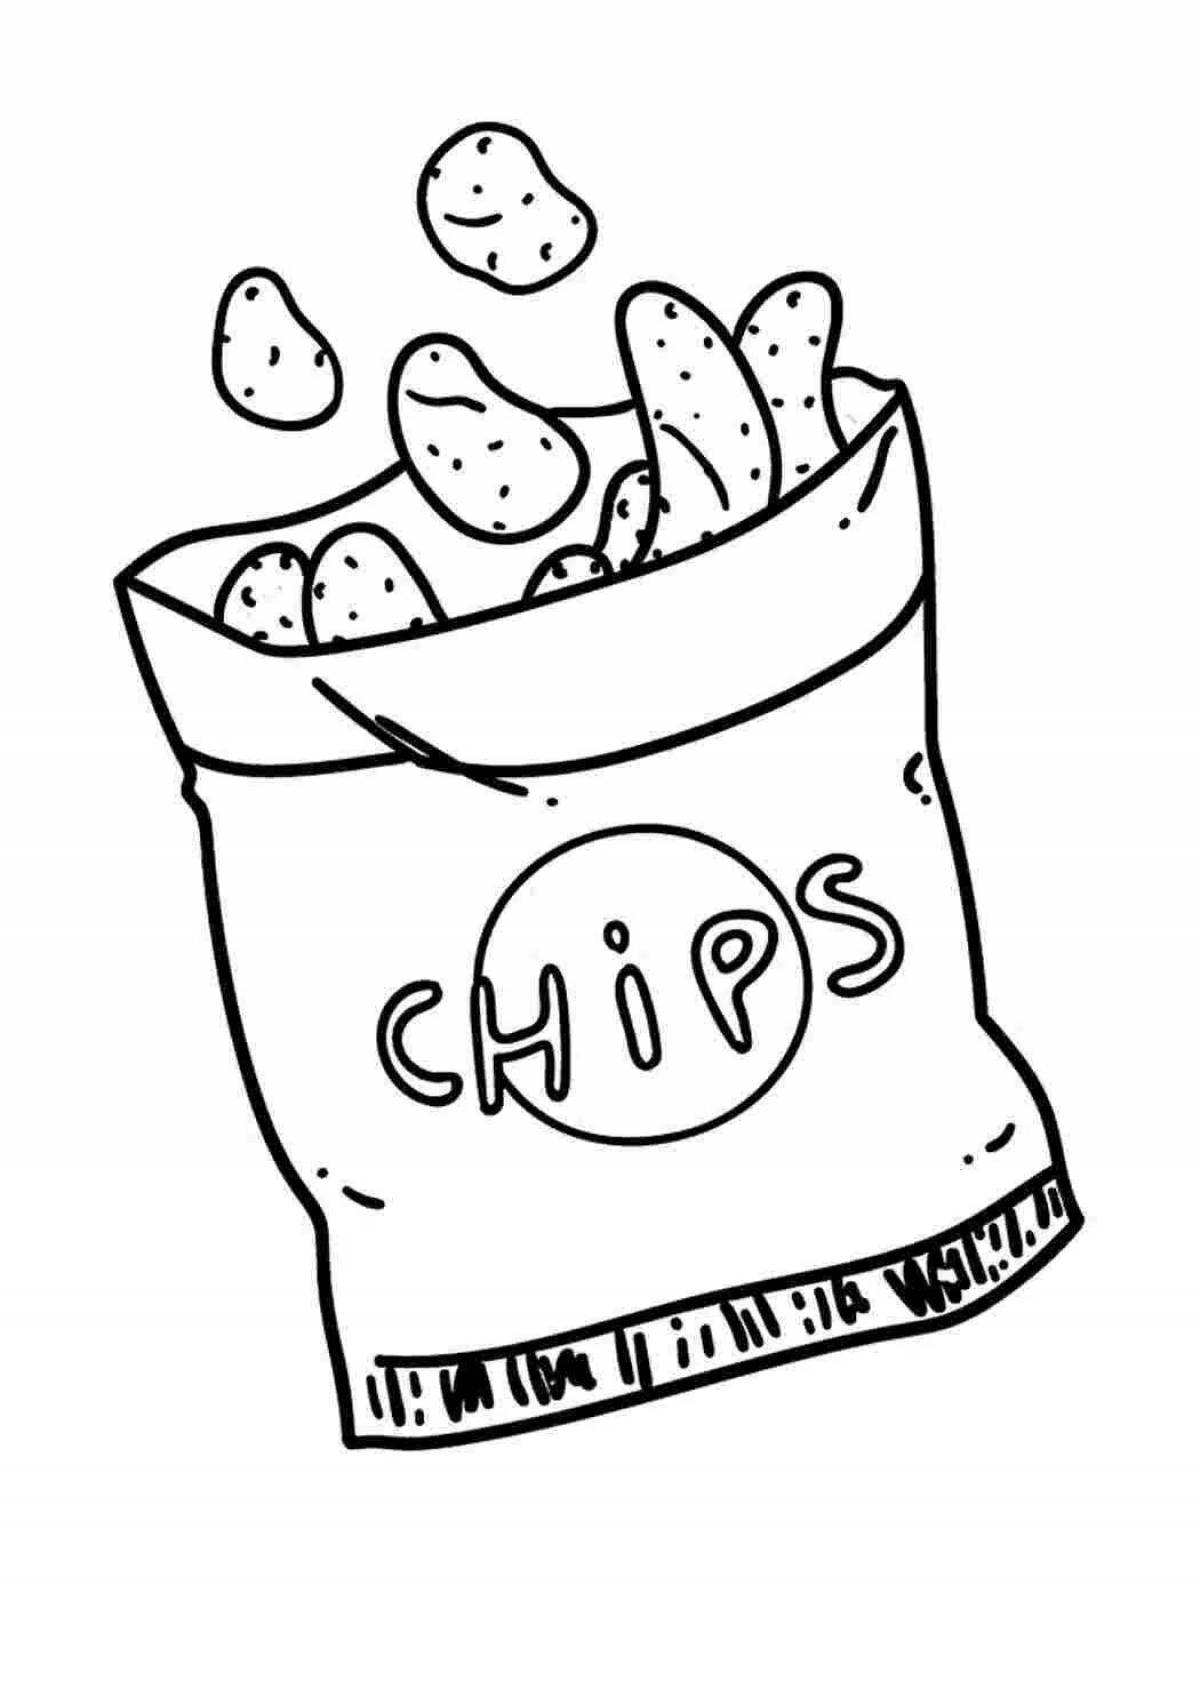 Coloring page delicious bag of chips